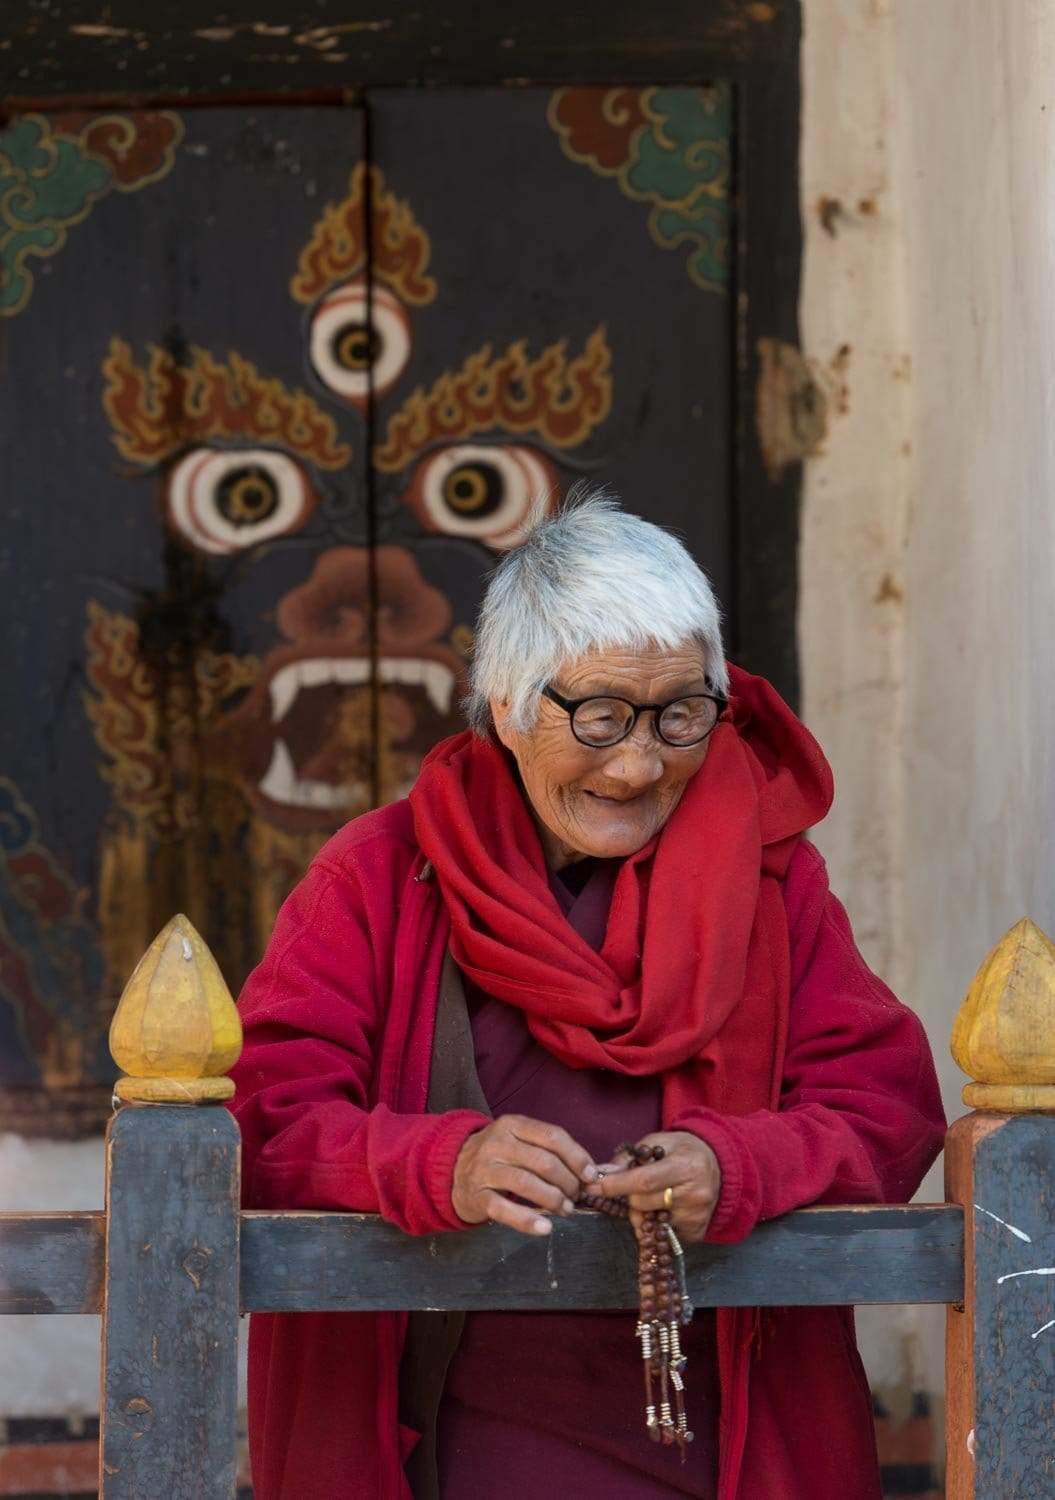 An old lady monk wearing a red gown, Lady Monk, Bhutan